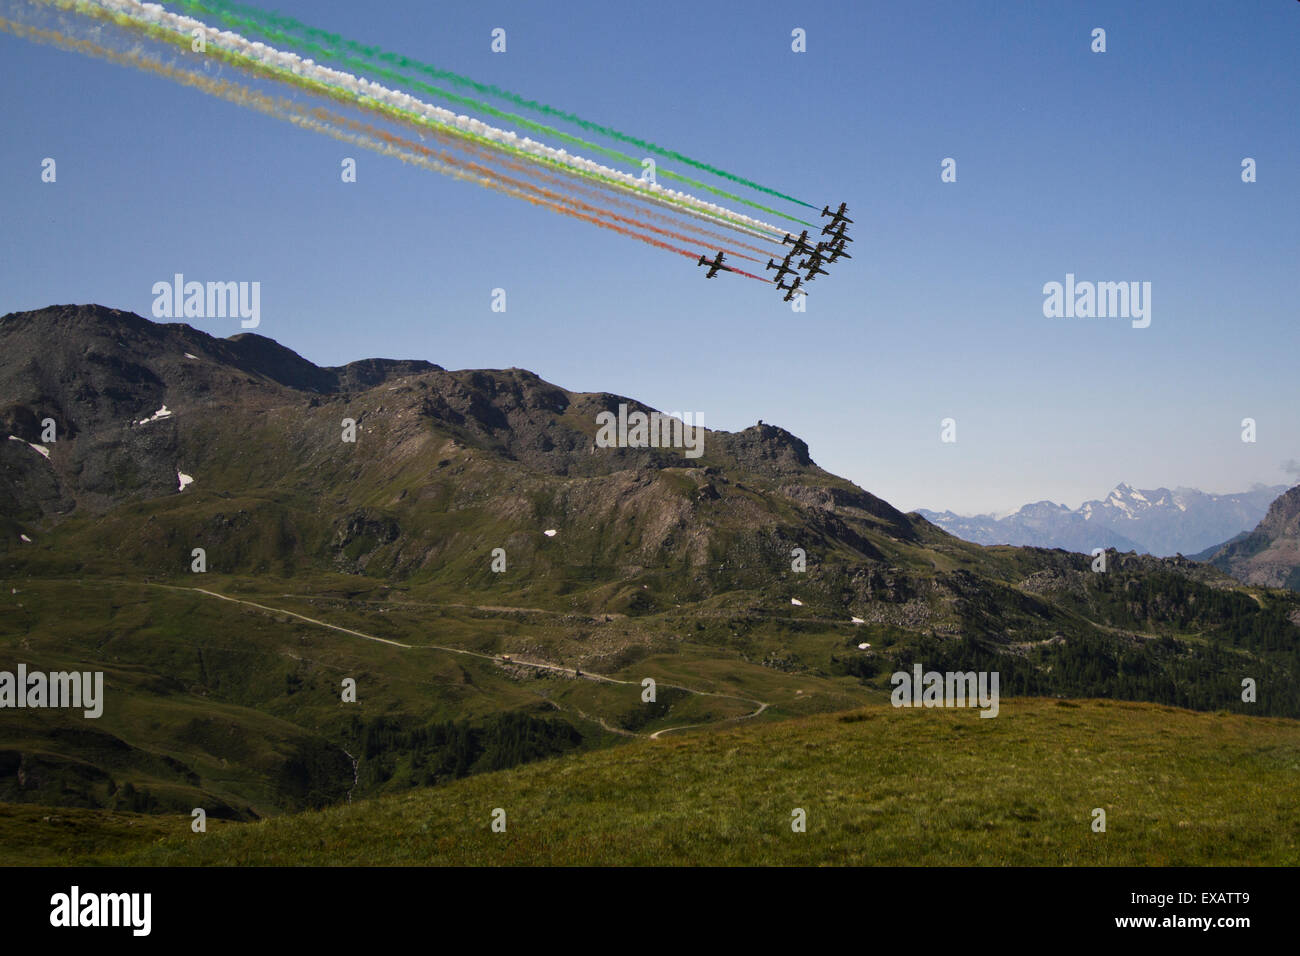 Cervinia, Italy. 10th July 2015. The acrobatic team 'Frecce Tricolori' of the Italian Air Force draws the Italian flag with smoke trails flying over Breuil-Cervinia. The event celebrates the 150 years of the first ascent of Matterhorn. Stock Photo